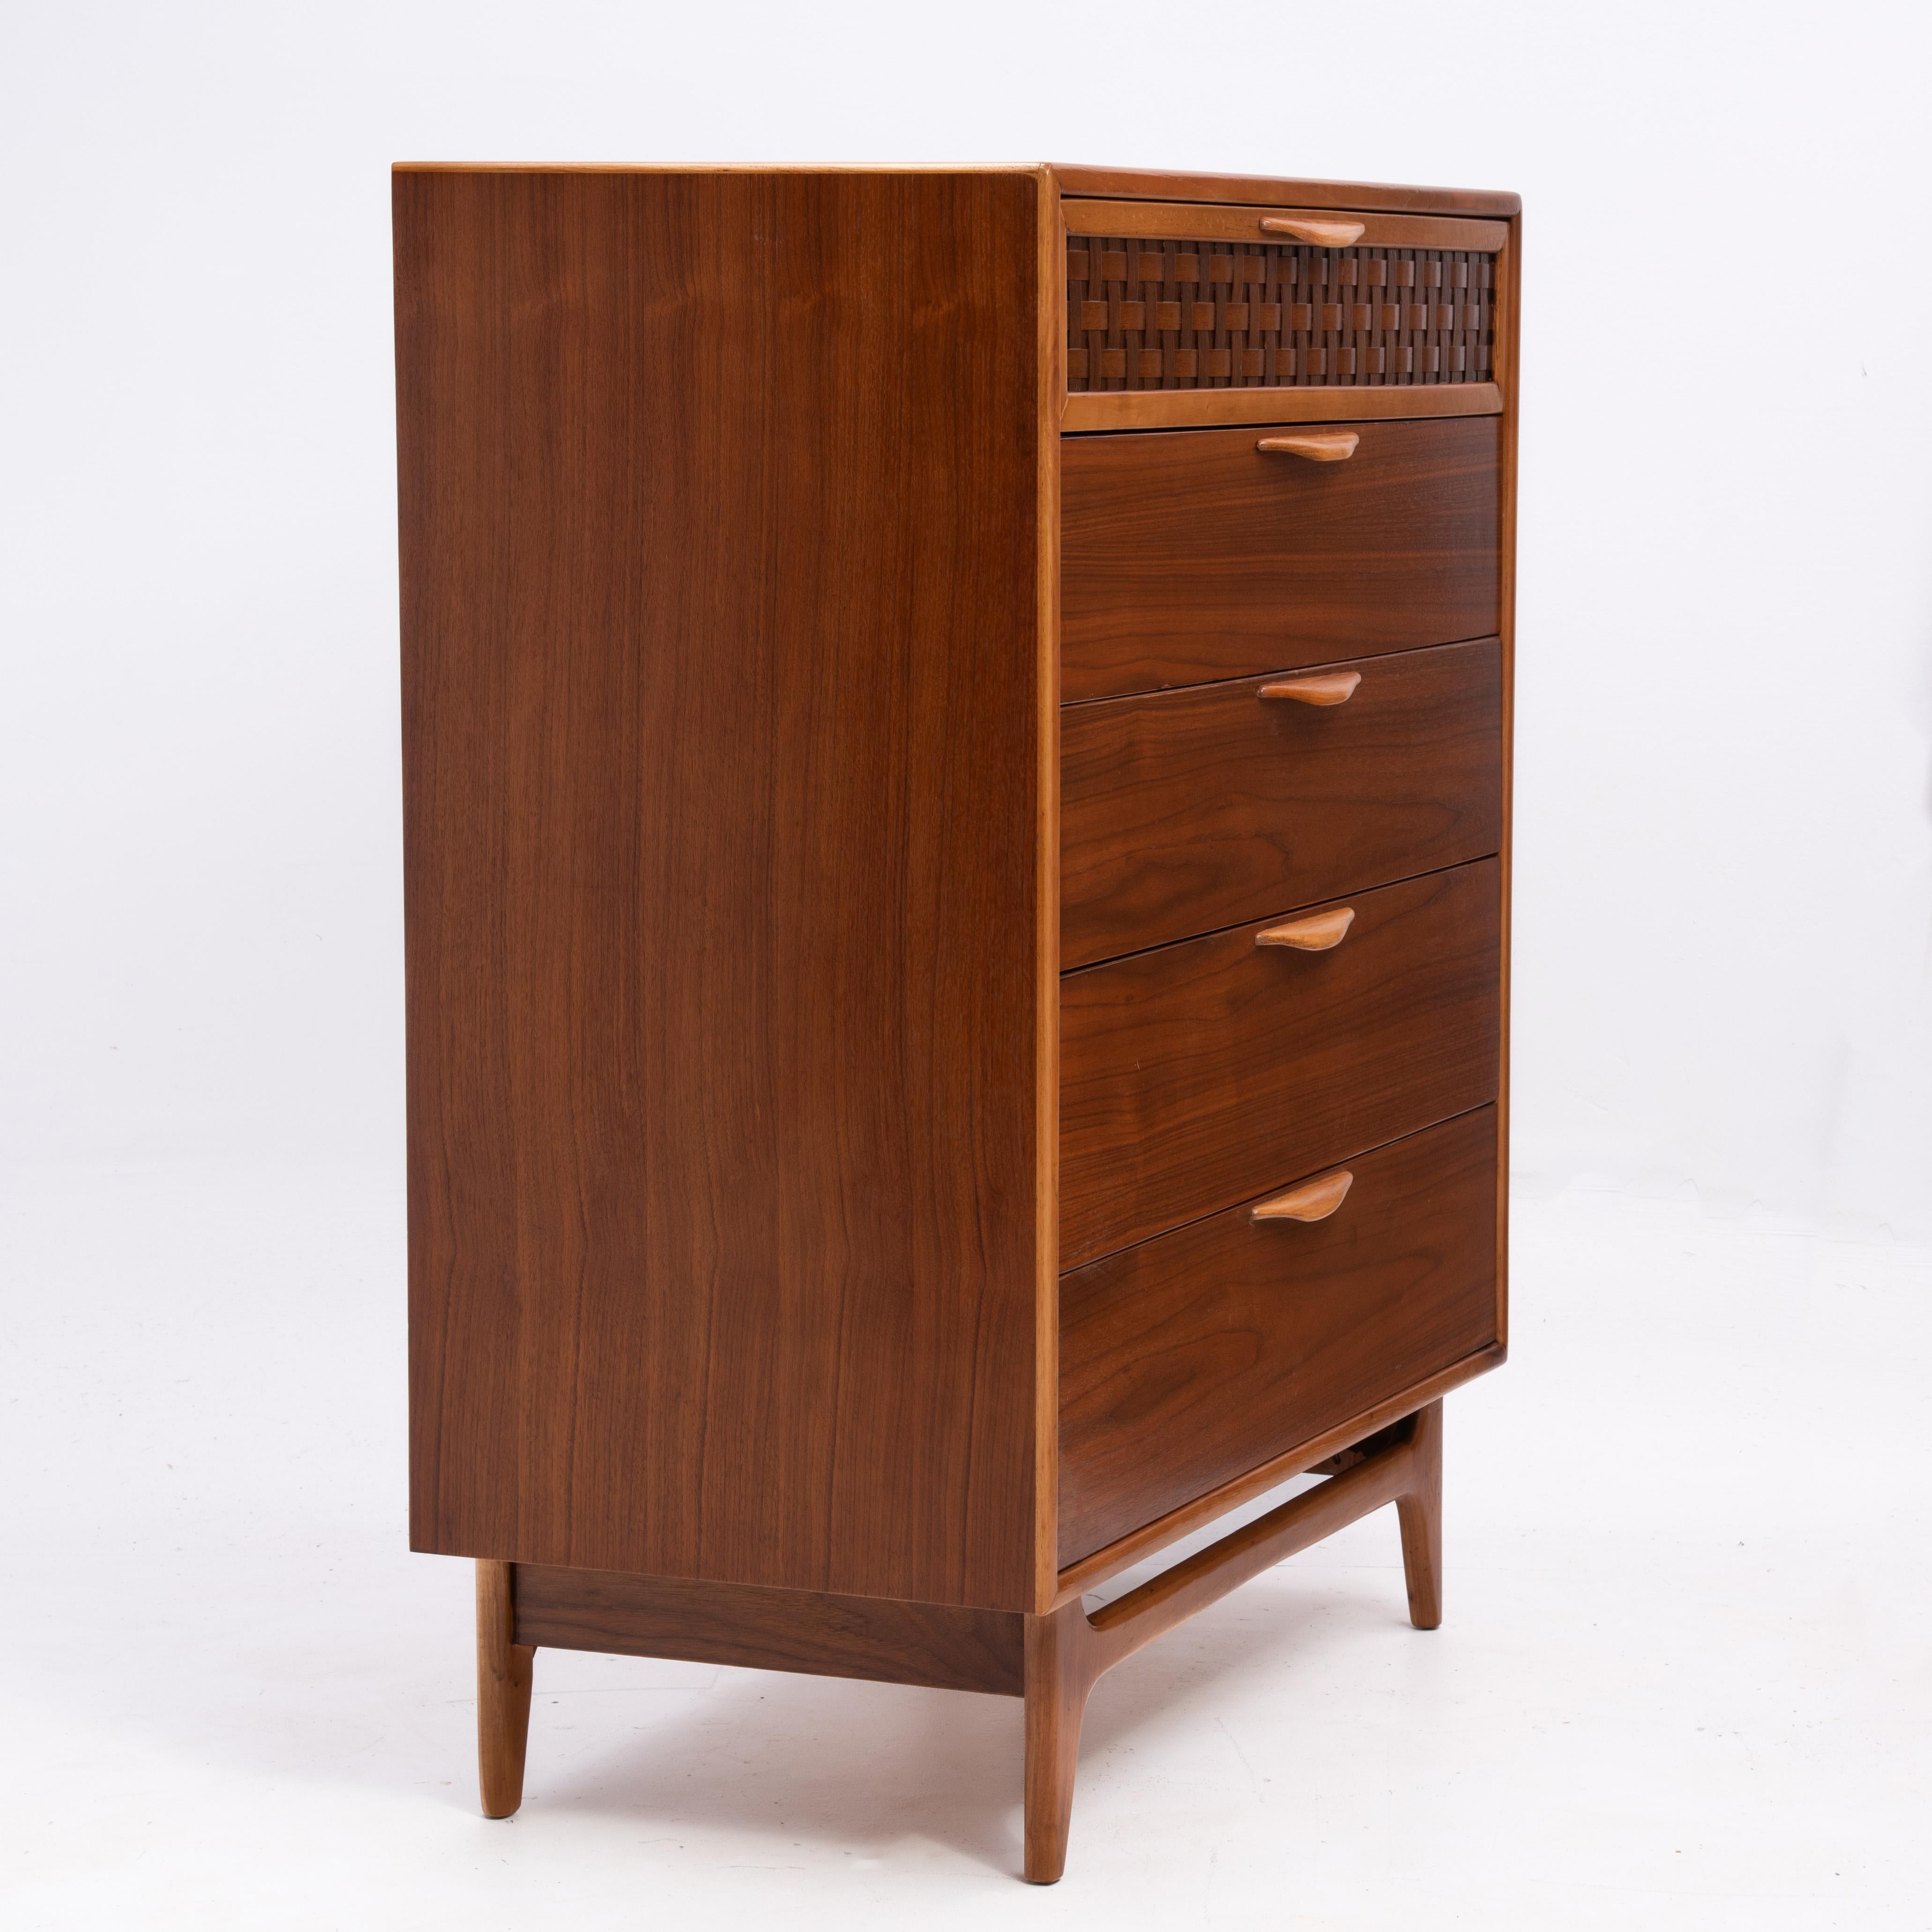 Warren Church for Lane Perception walnut, mahogany and oak Mid Century tall chest or dresser with a wonderful contrasting basketweave detail on the top drawer.

The depth of the top is actually 19 inches. 20 inches includes the handles.